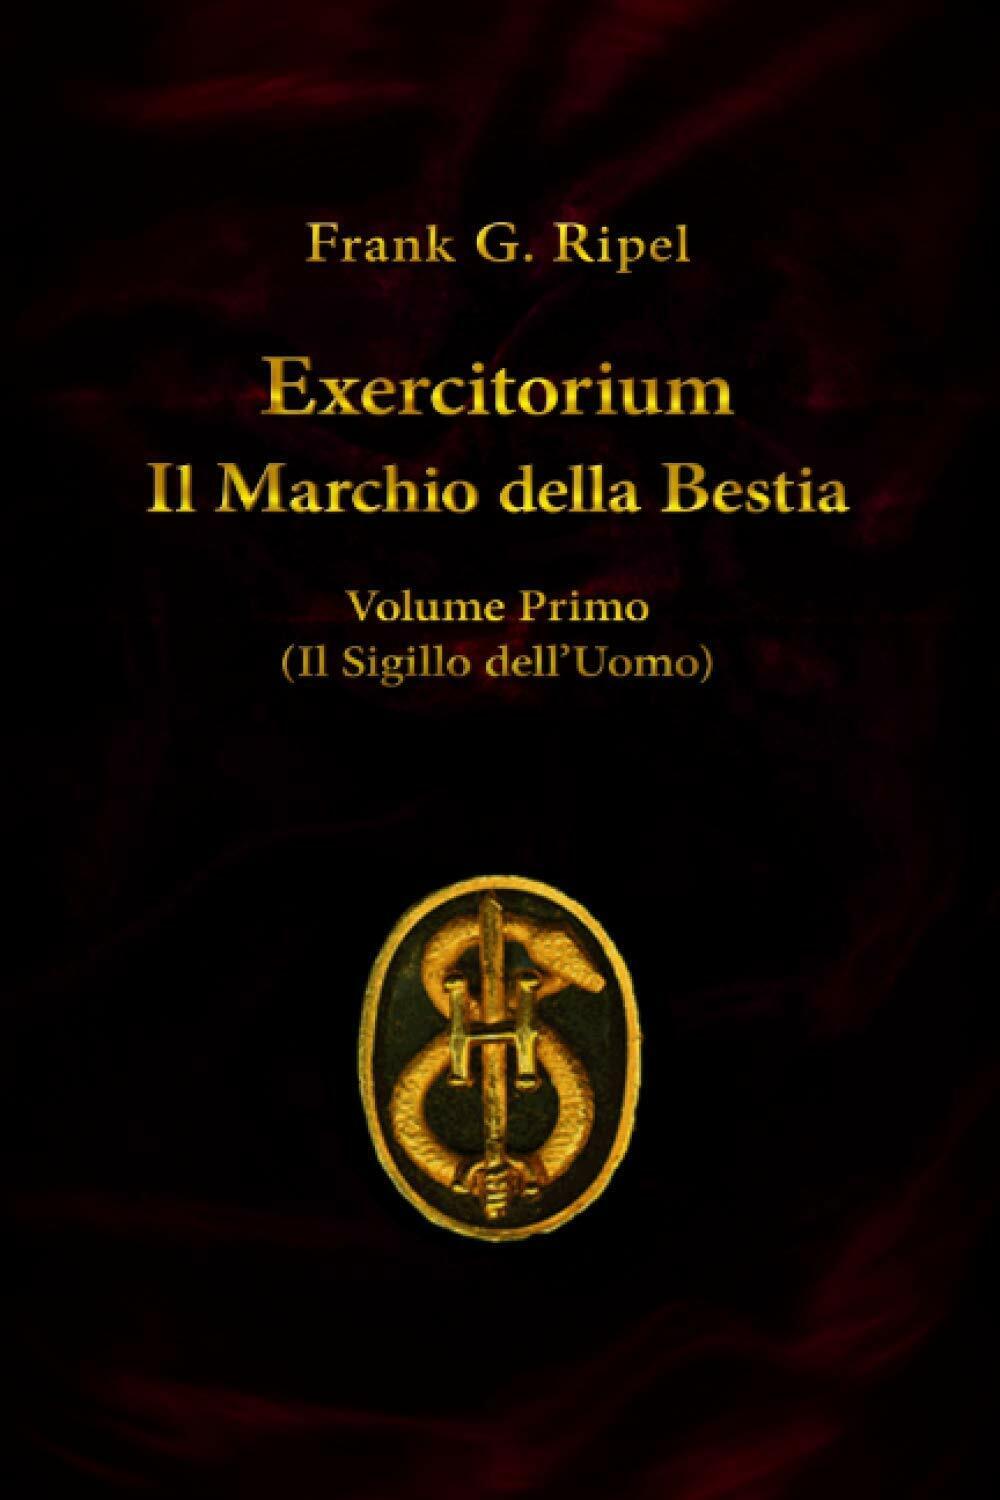 Exercitorium volume primo di Frank G. Ripel,  2020,  Indipendently Published